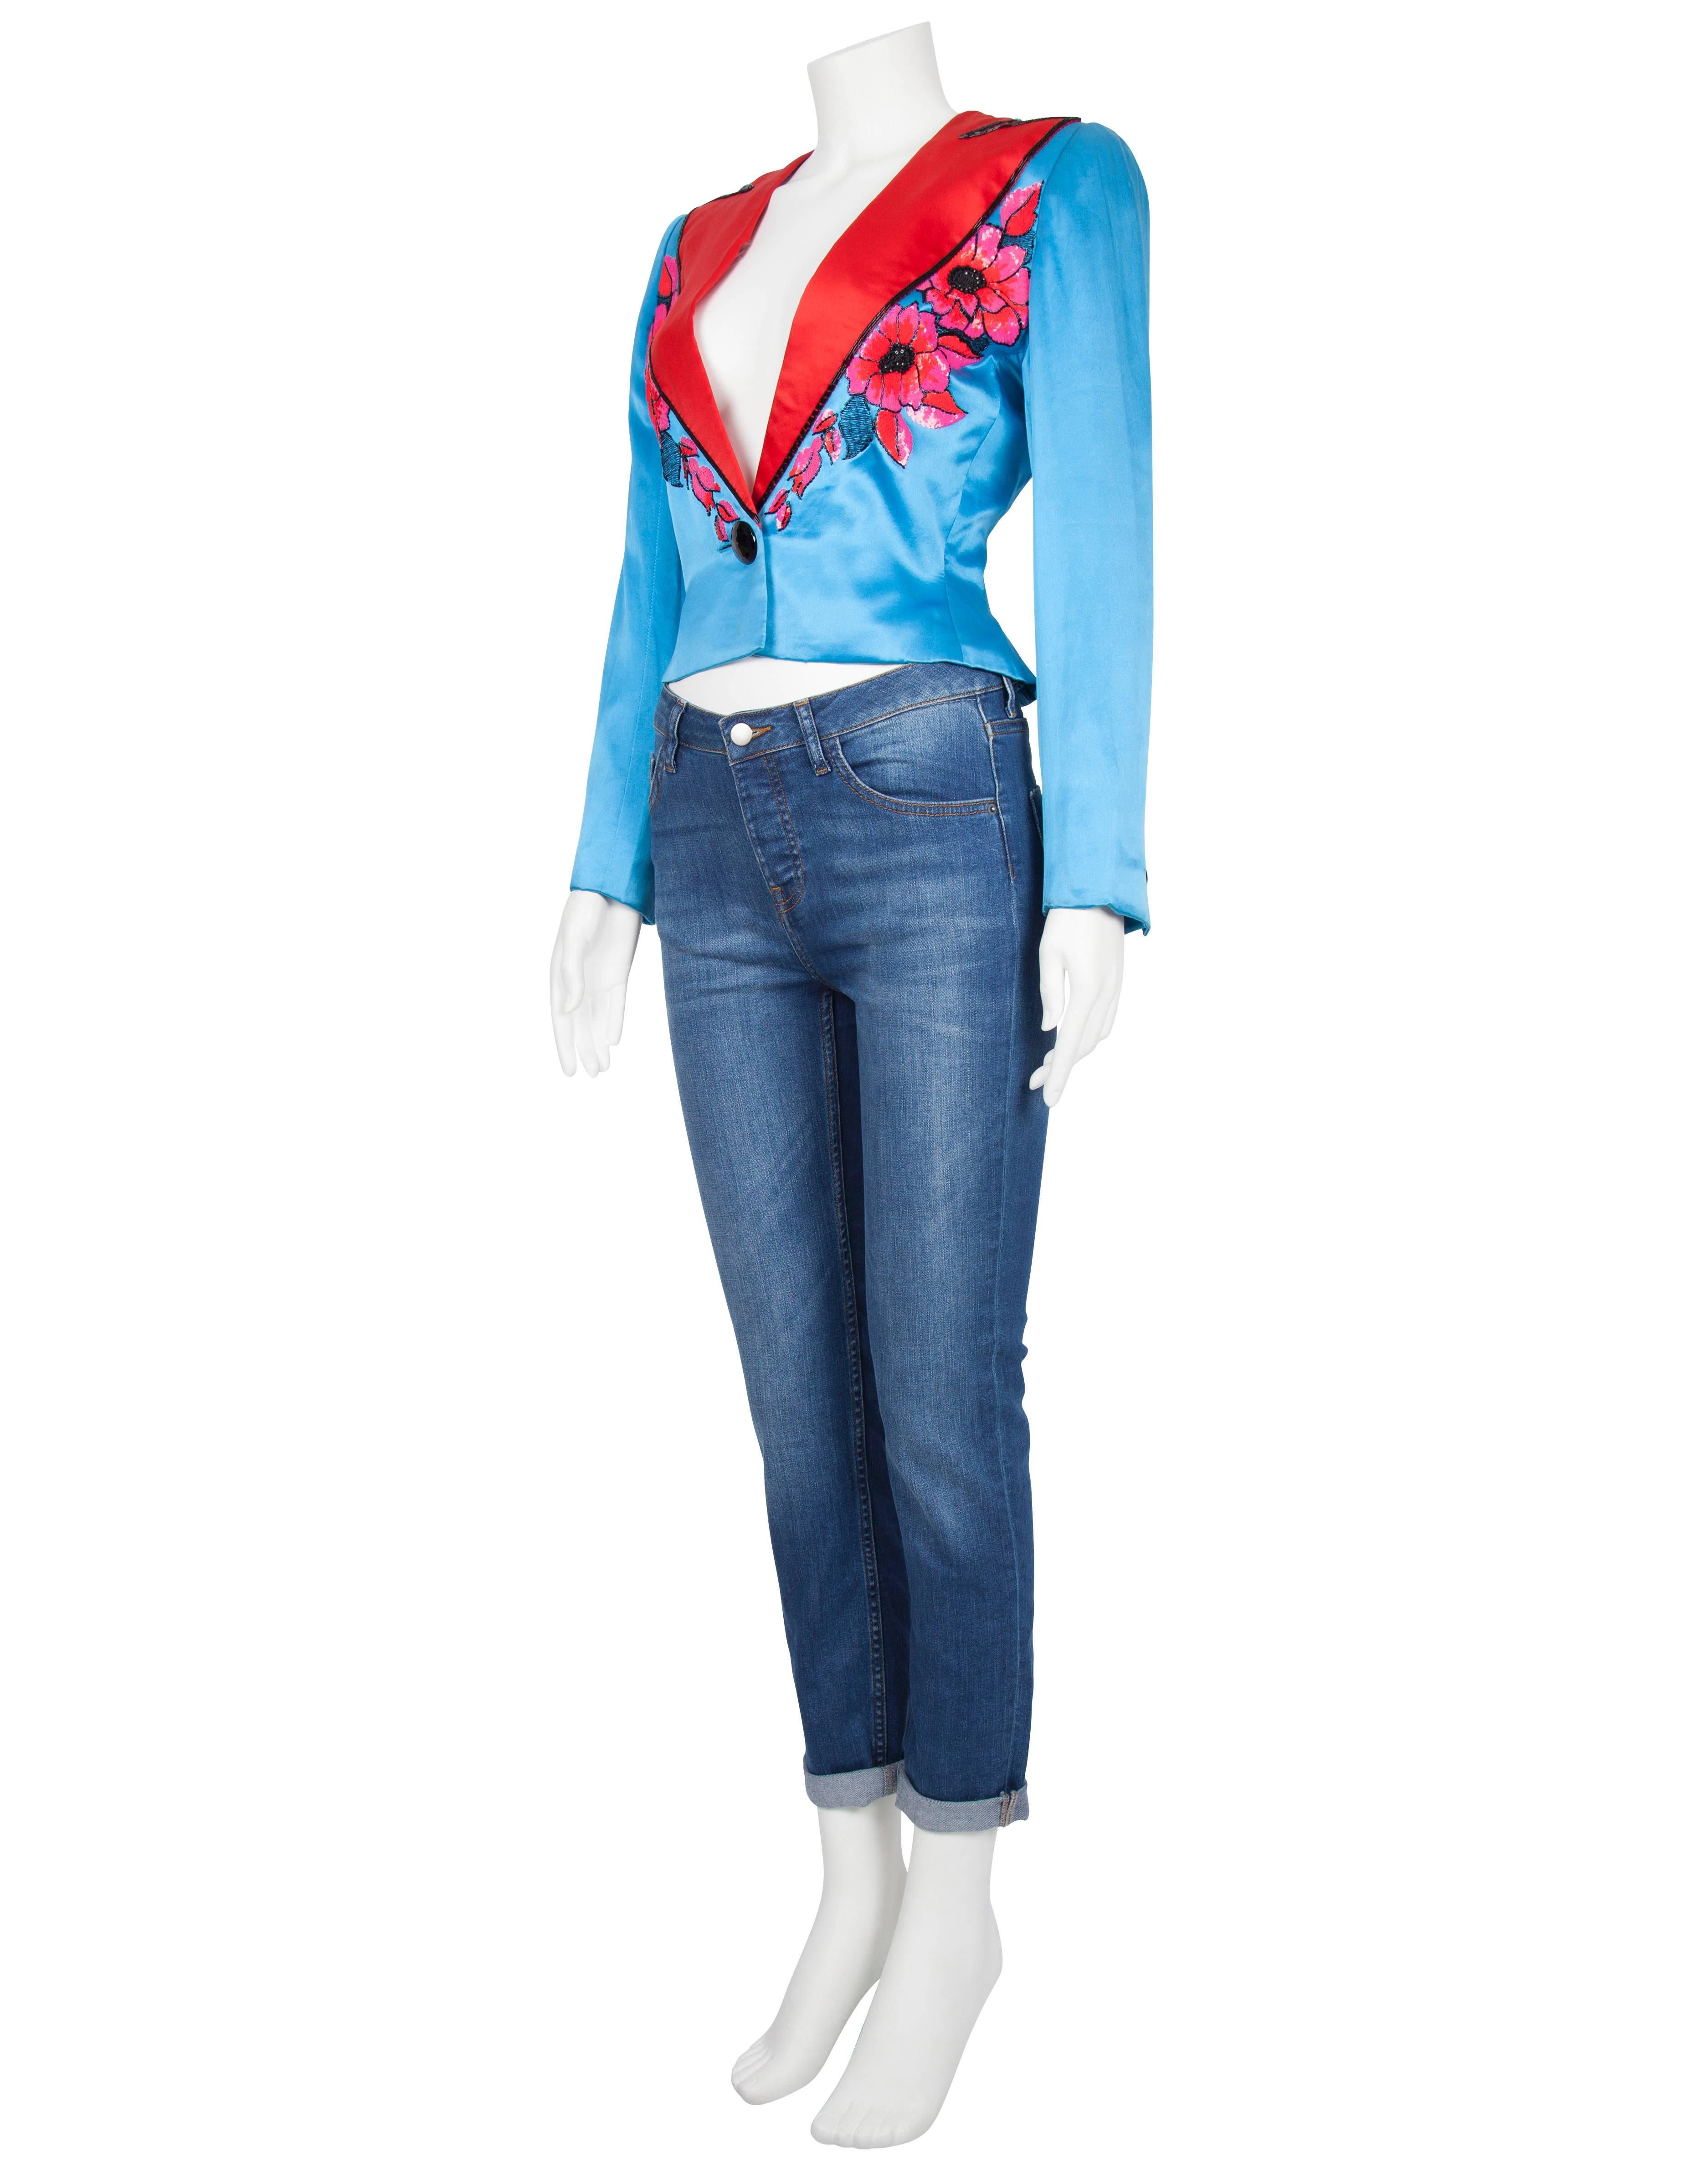 Women's S/S 1983 Dior Couture Turquoise Satin Jacket Pink & Red Sequinned Embroidery For Sale